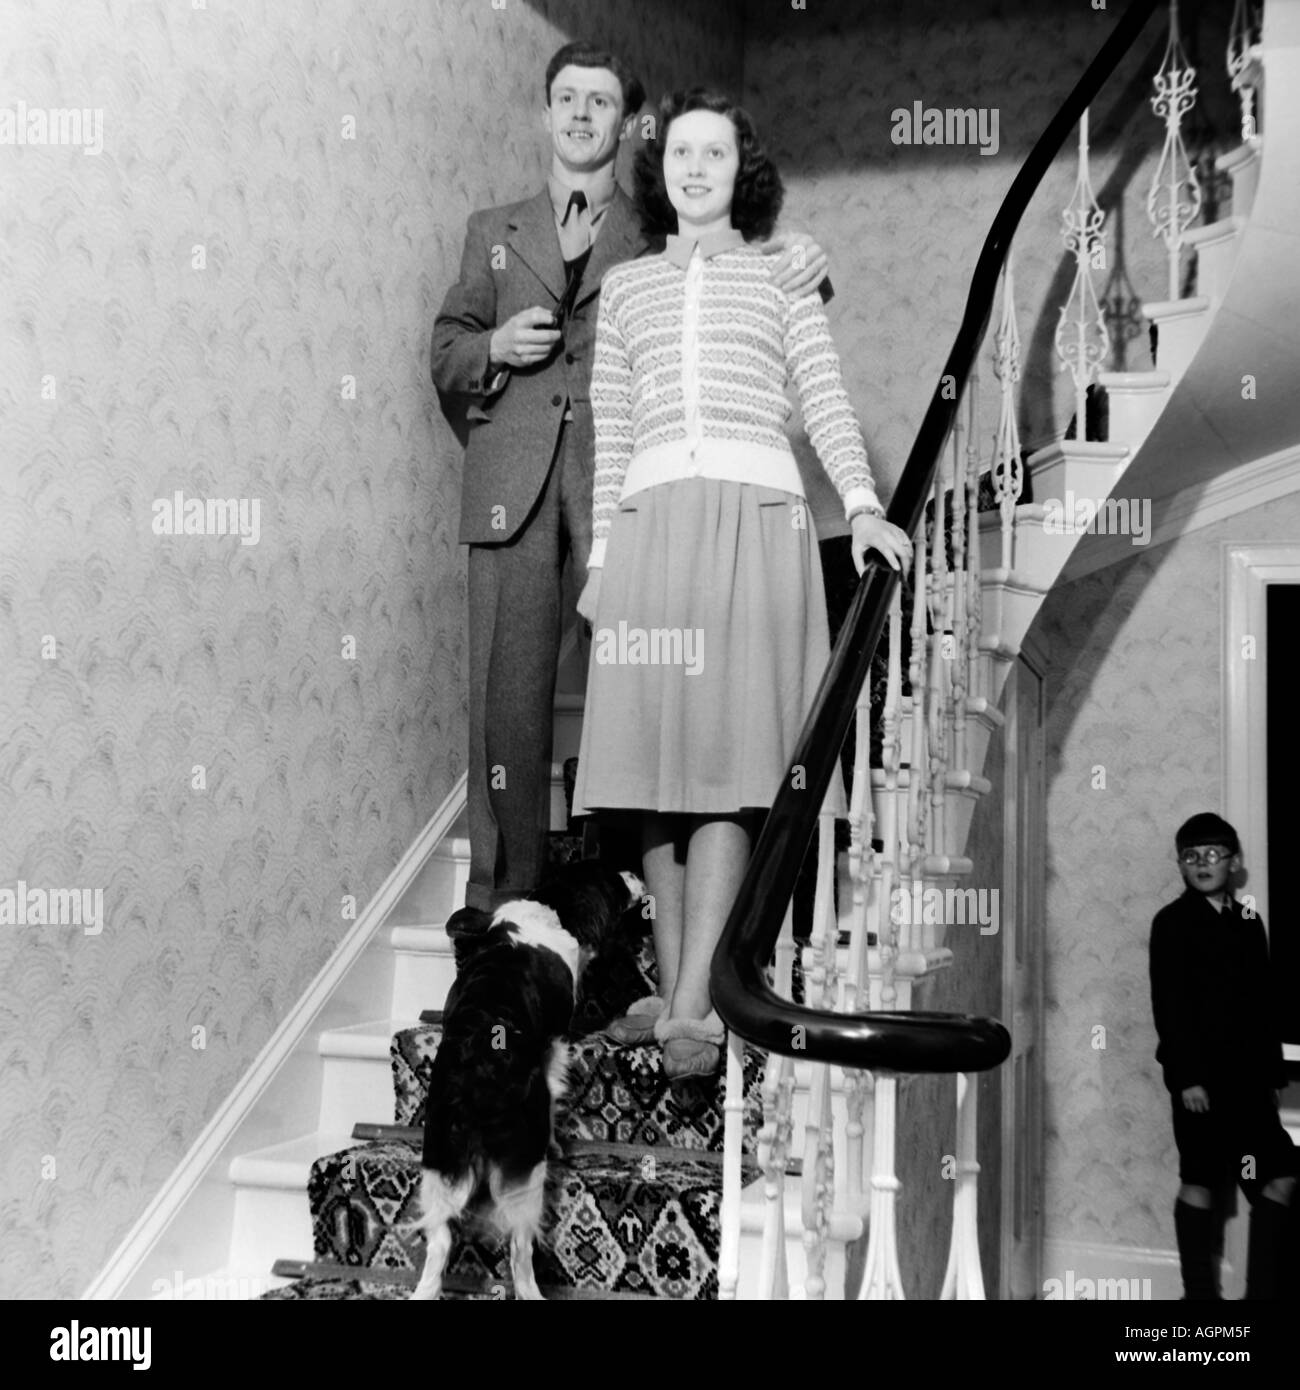 OLD VINTAGE BLACK AND WHITE FAMILY SNAPSHOT PHOTOGRAPH OF MARRIED COUPLE STANDING ON STAIRCASE IN HOUSE CIRCA 1950 Stock Photo